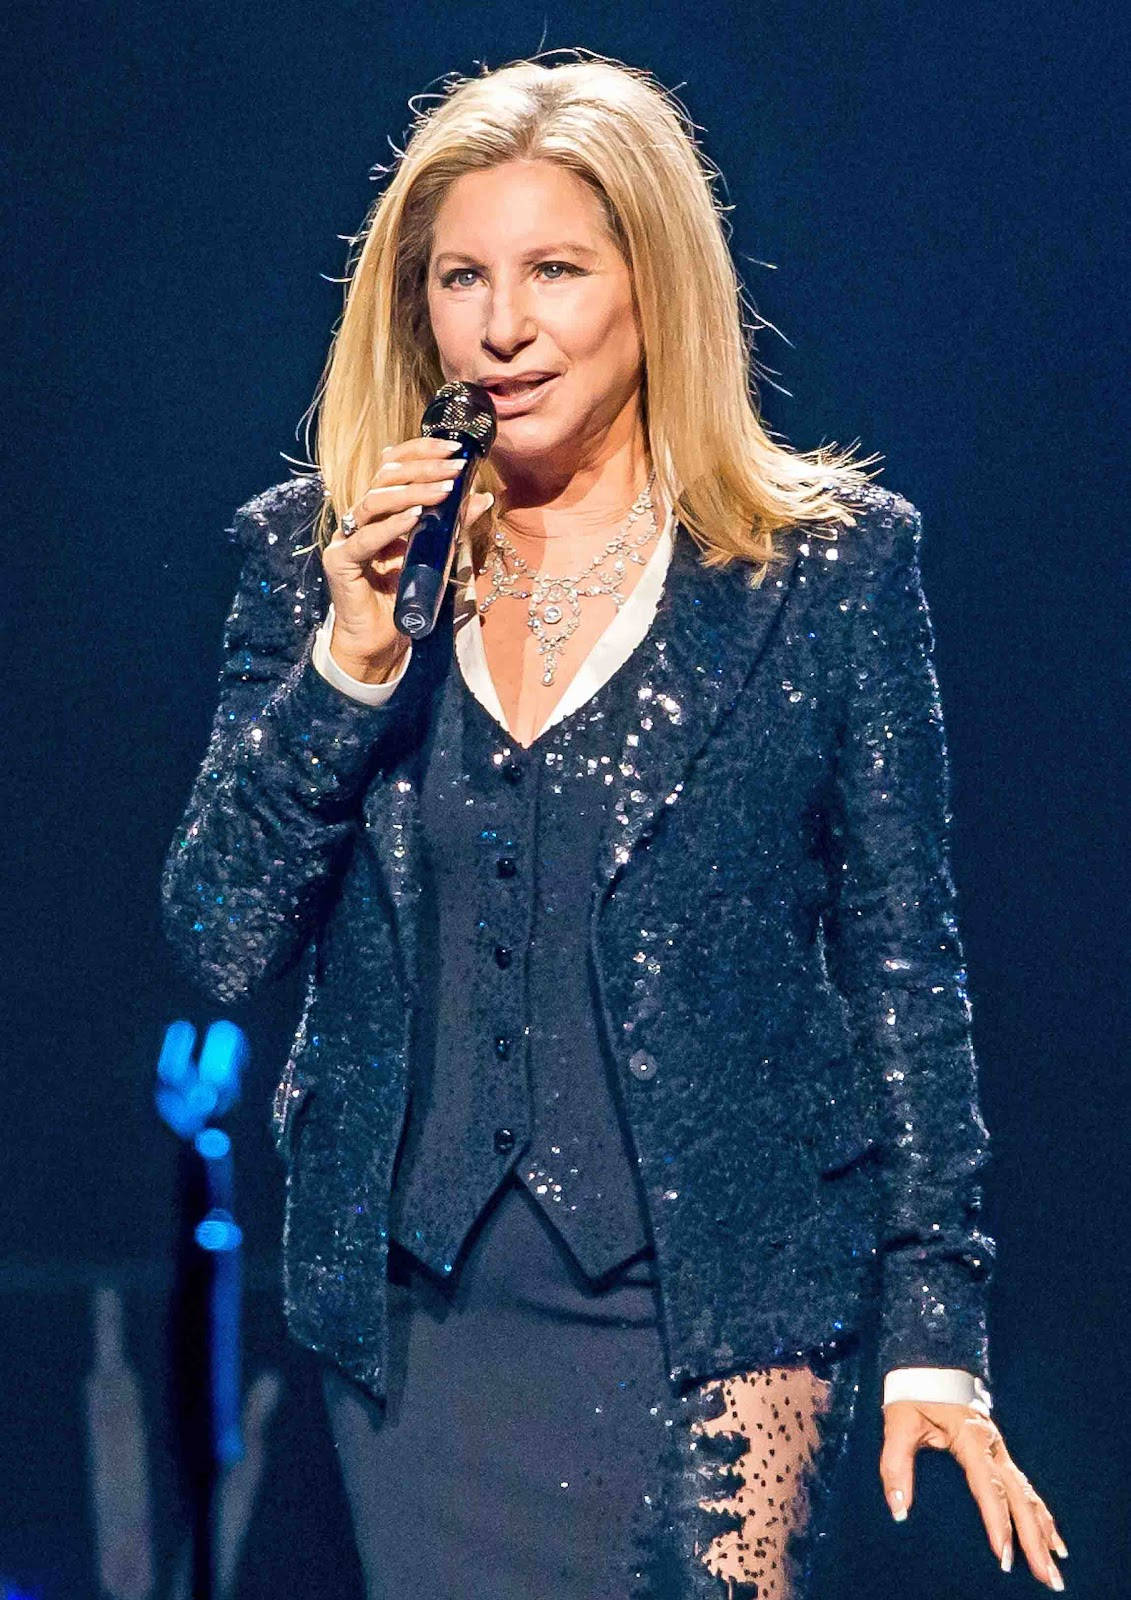 Barbra Streisand performing live at MGM Grand Wallpaper